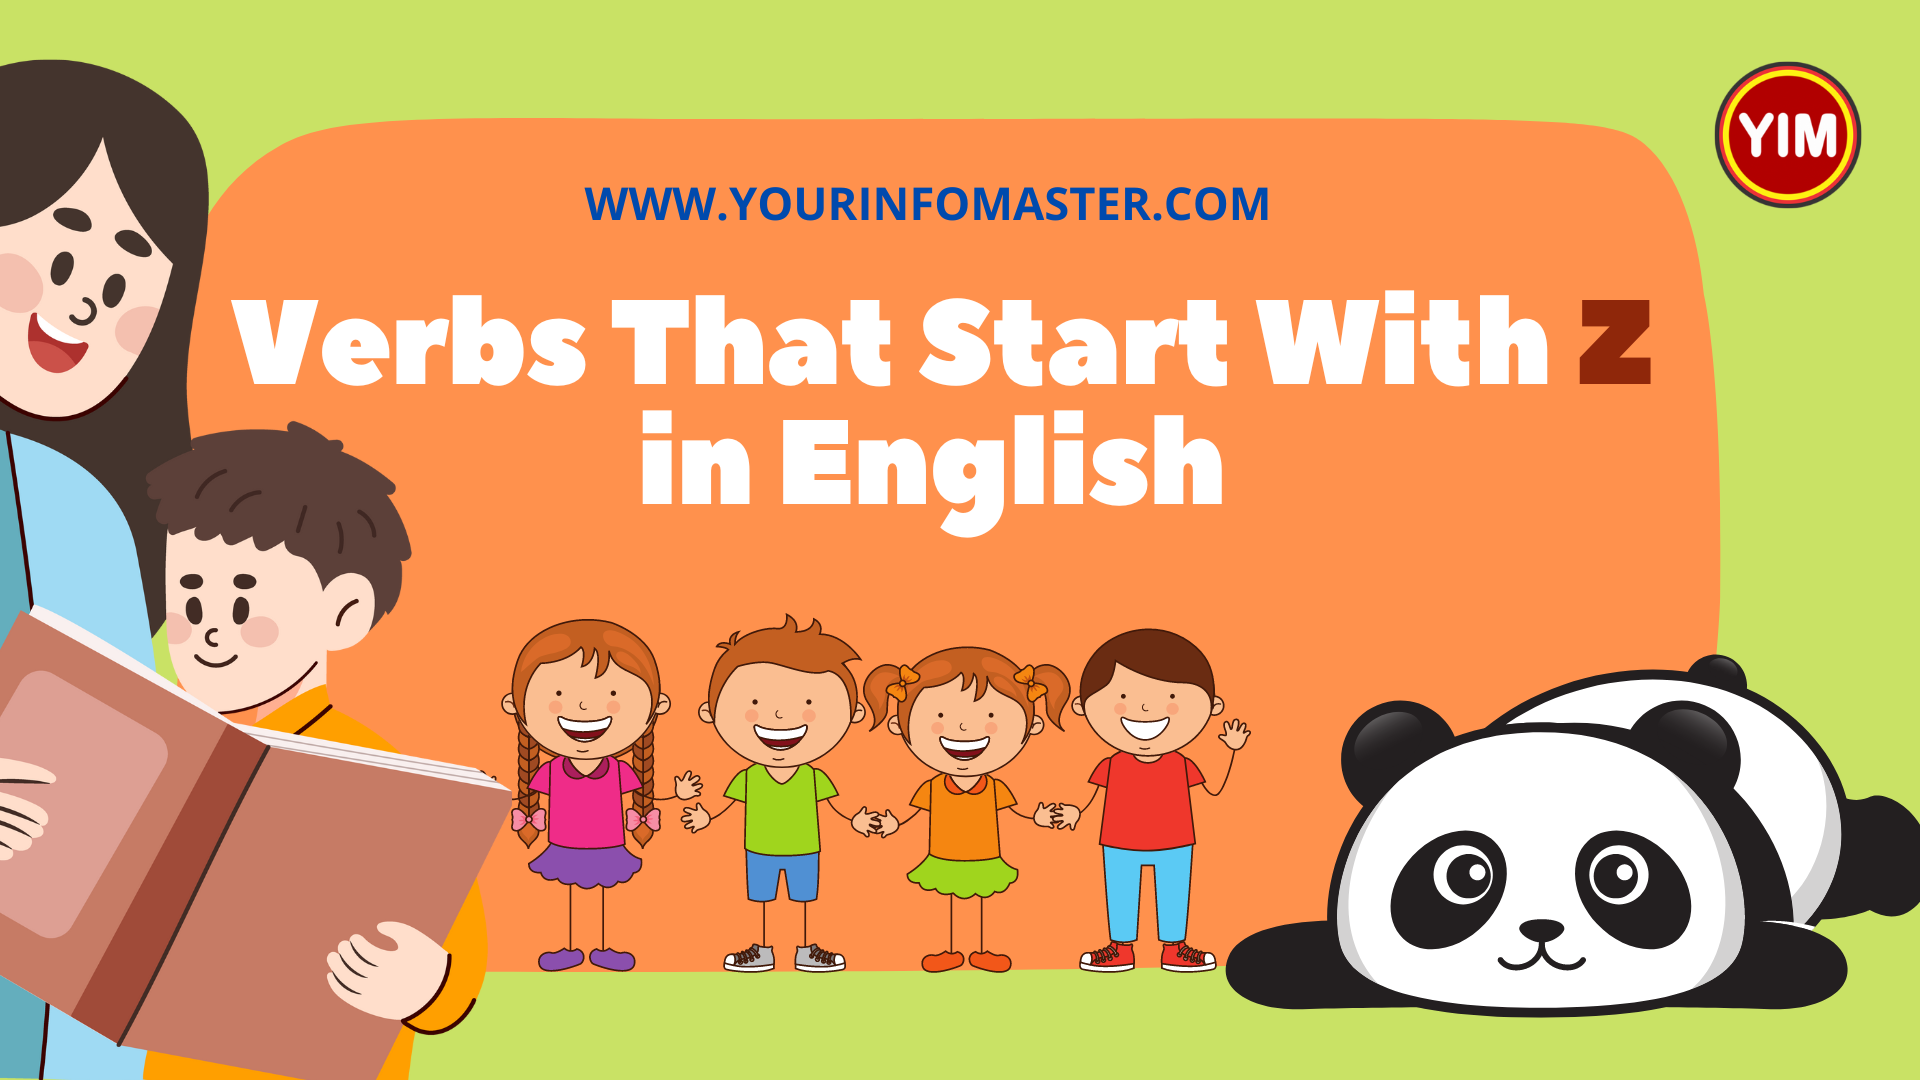 5 Letter Verbs, 5 Letter Verbs Starting With Z, Action Words, Action Words That Start With Z, English, English Grammar, English Vocabulary, English Words, List of Verbs That Start With Z, Verbs List, Verbs That Start With Z, Vocabulary, Words That Start with Z, Z Action Words, Z Verbs, Z Verbs in English